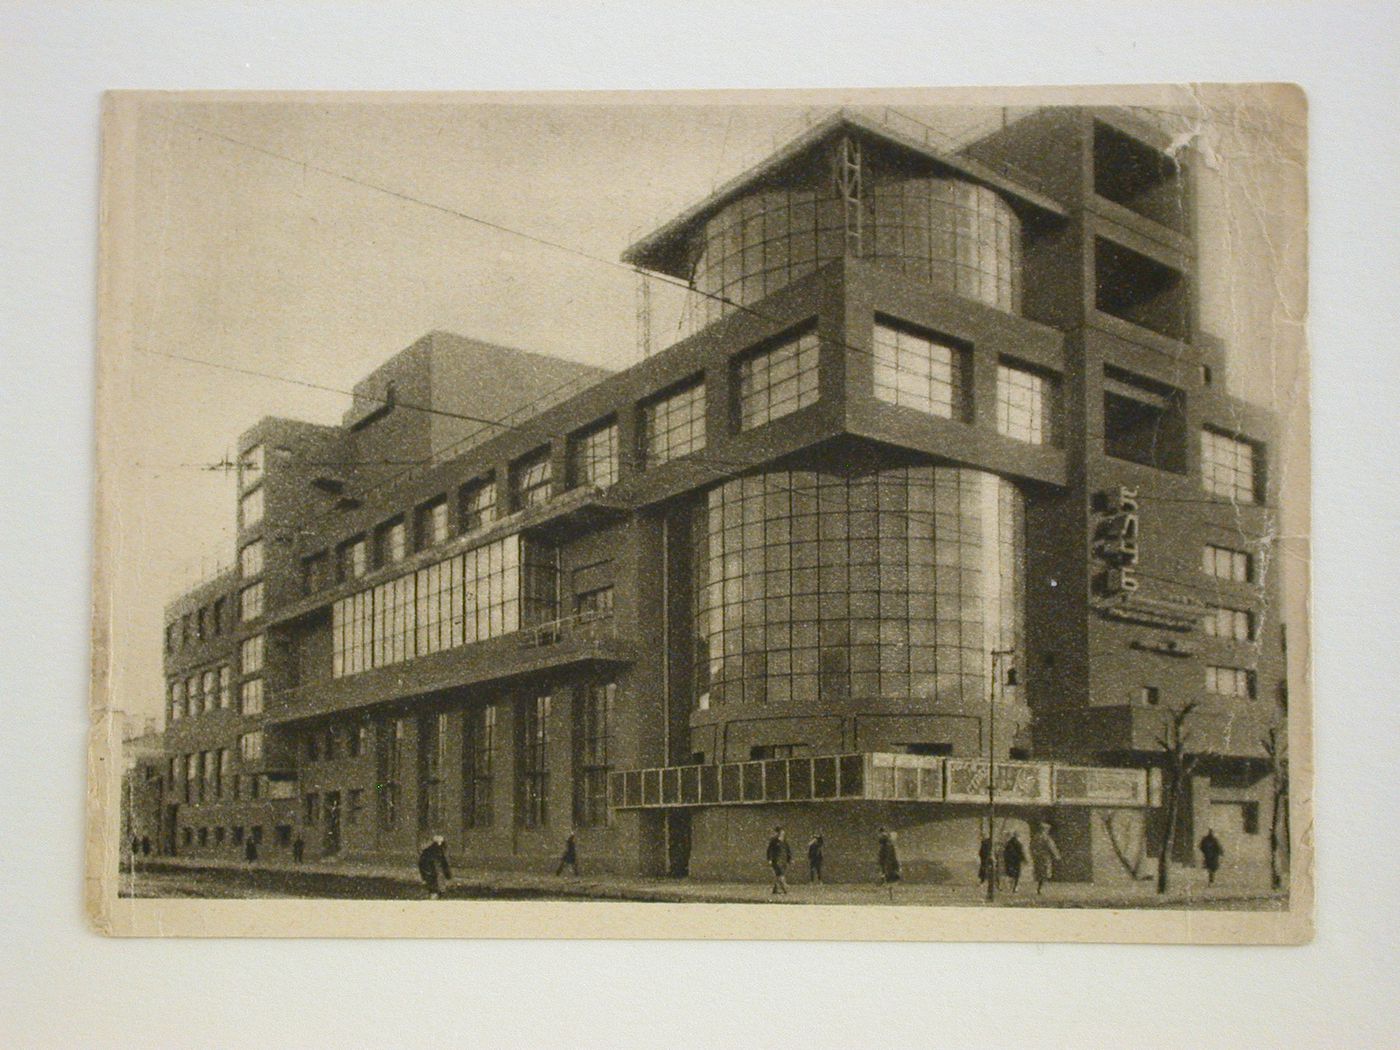 Exterior view of the Zuev Club (club for communal services workers), Moscow